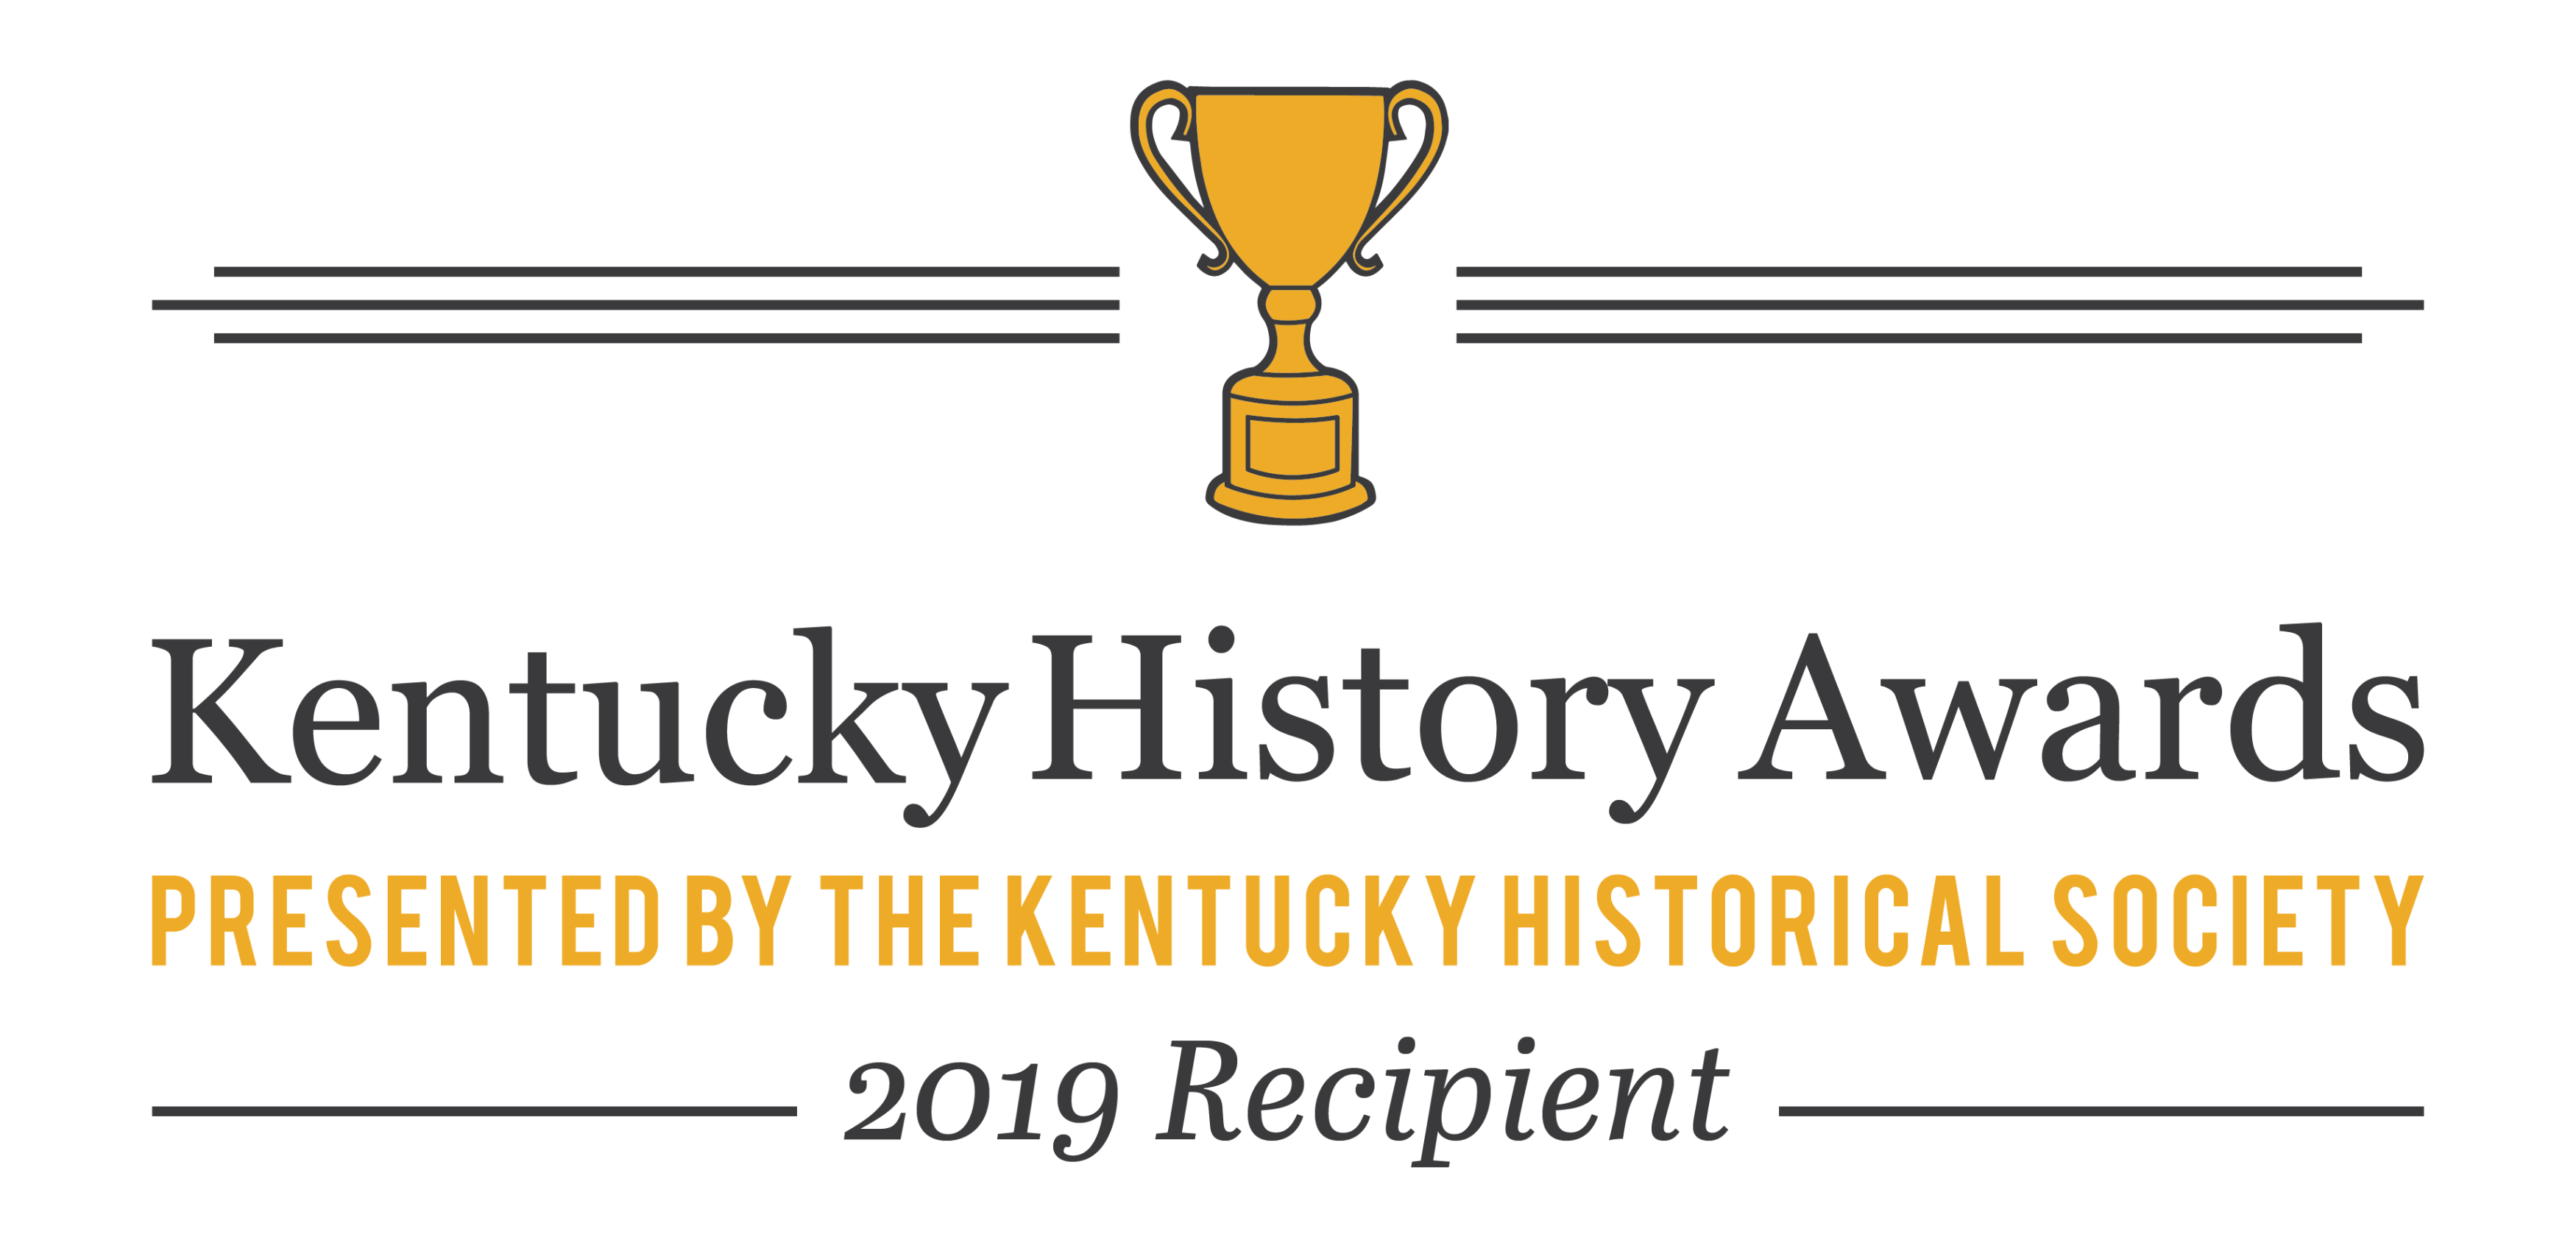 Kentucky History Awards Icon noting this collection received the award in 2019.